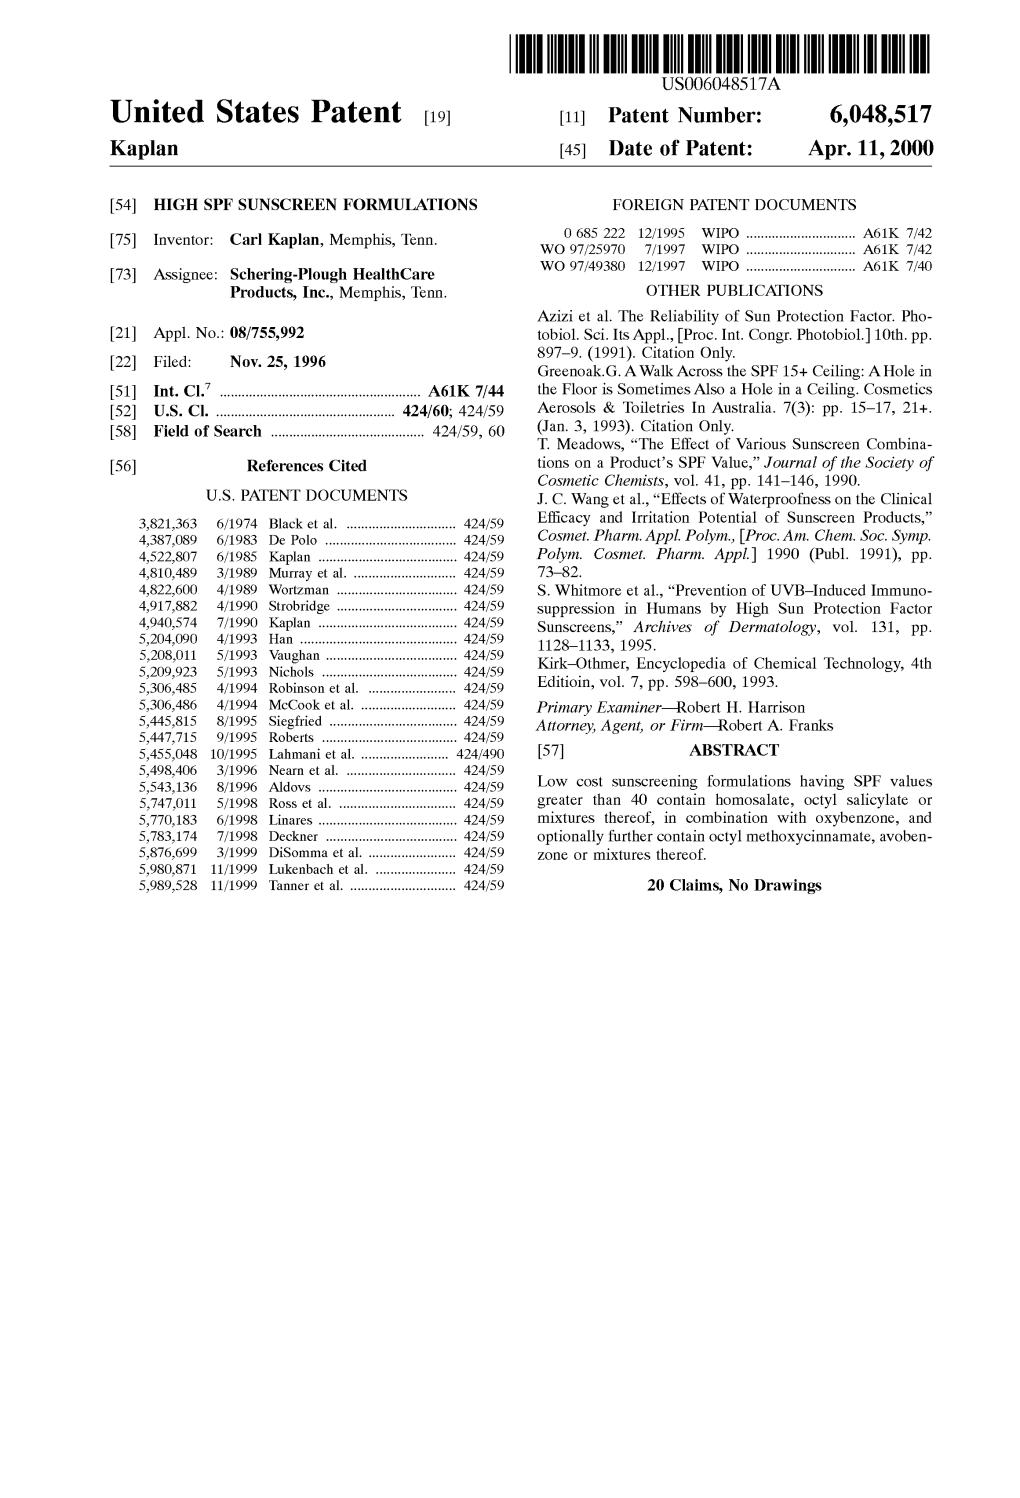 United States Patent (19) 11 Patent Number: 6,048,517 Kaplan (45) Date of Patent: Apr